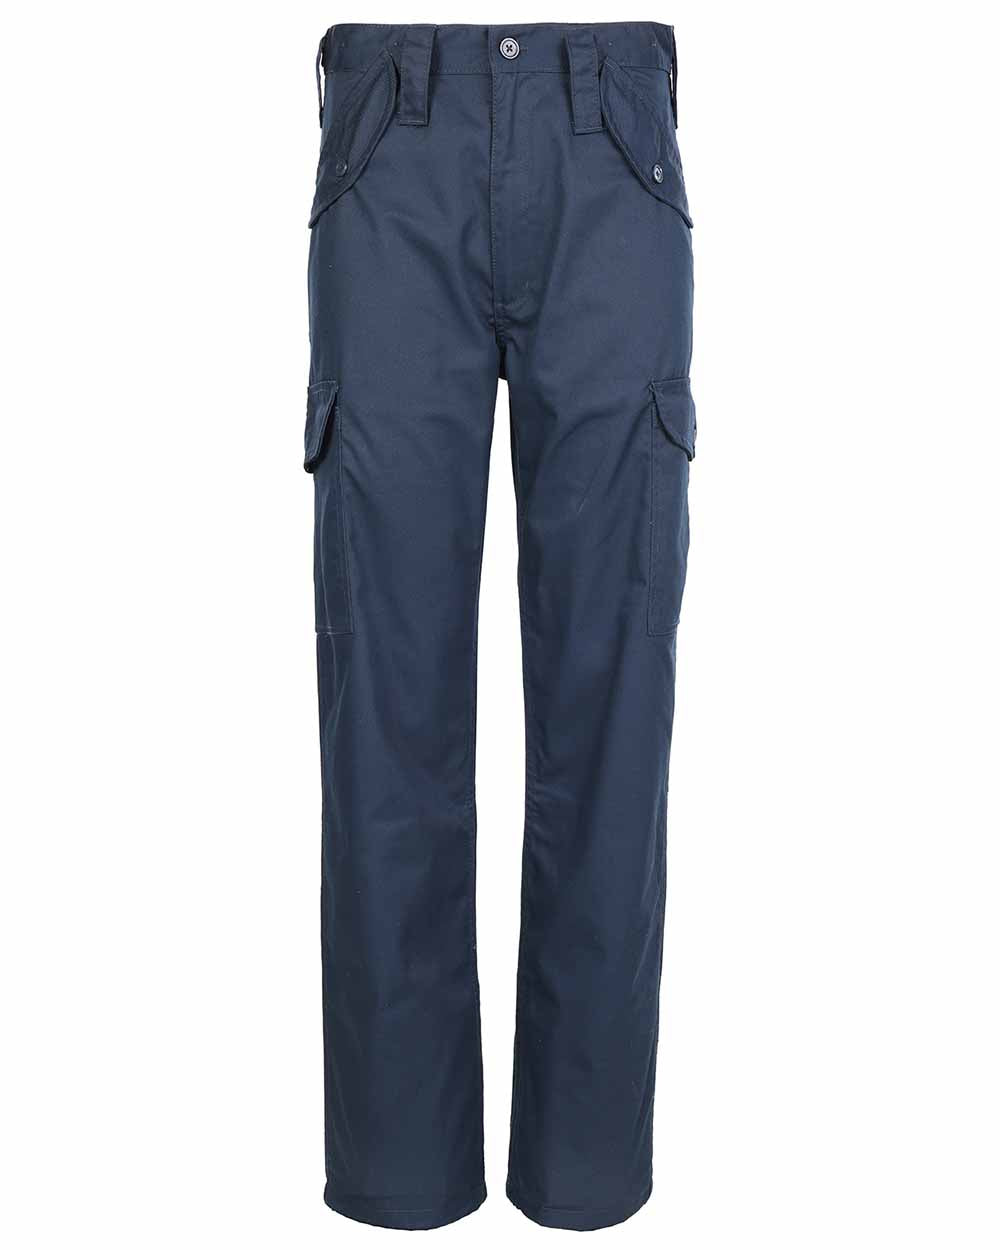 Fort Combat Trousers in Navy 